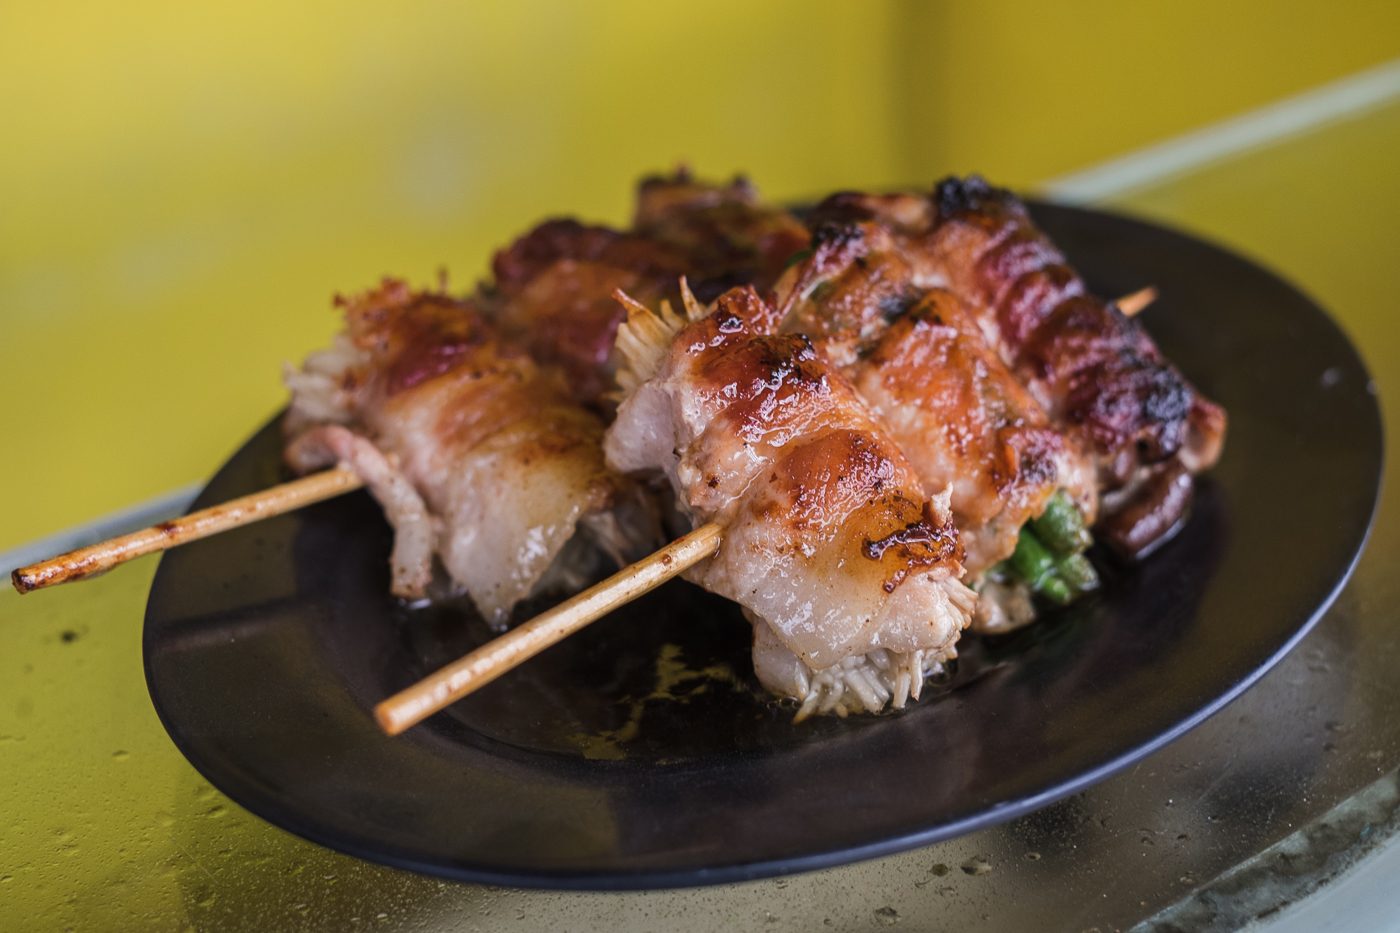 HK Eat Fresh's best seller, asparagus, mushroom, and crabstick wrapped in bacon, sells for P120 for two skewers. 